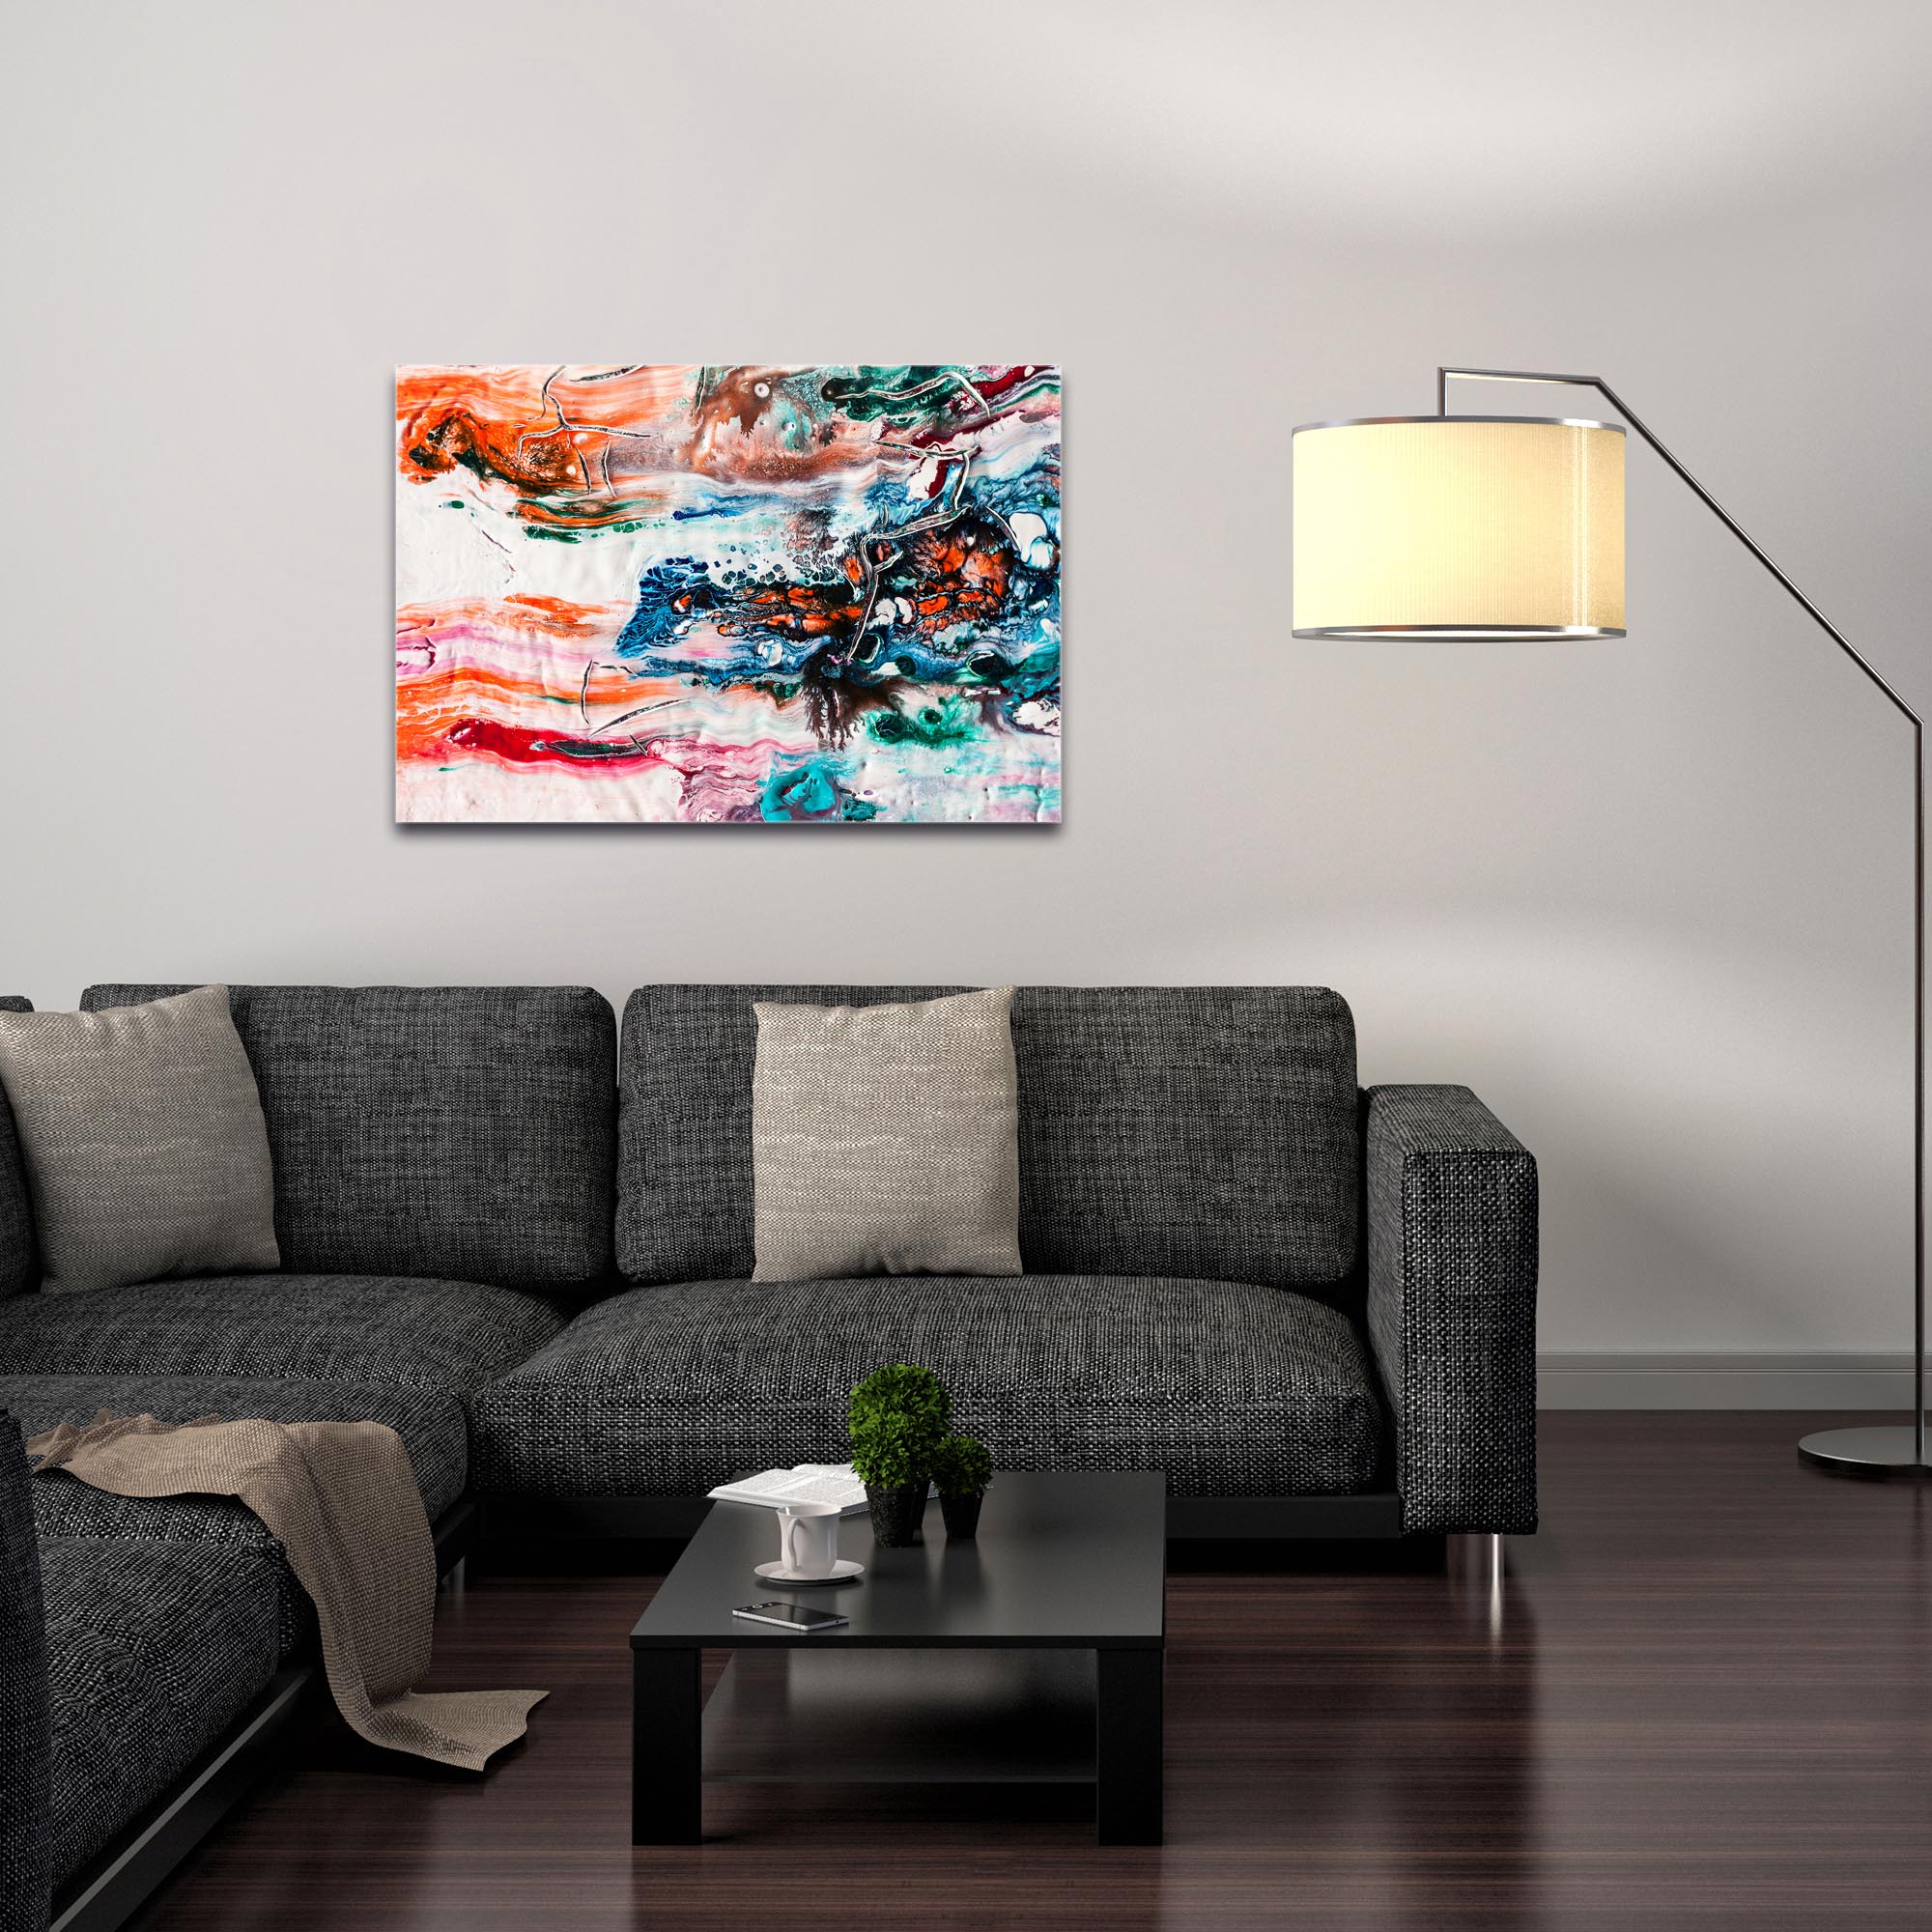 Abstract Wall Art 'Sunset on Her Breath 1' - Colorful Urban Decor on Metal or Plexiglass - Image 3